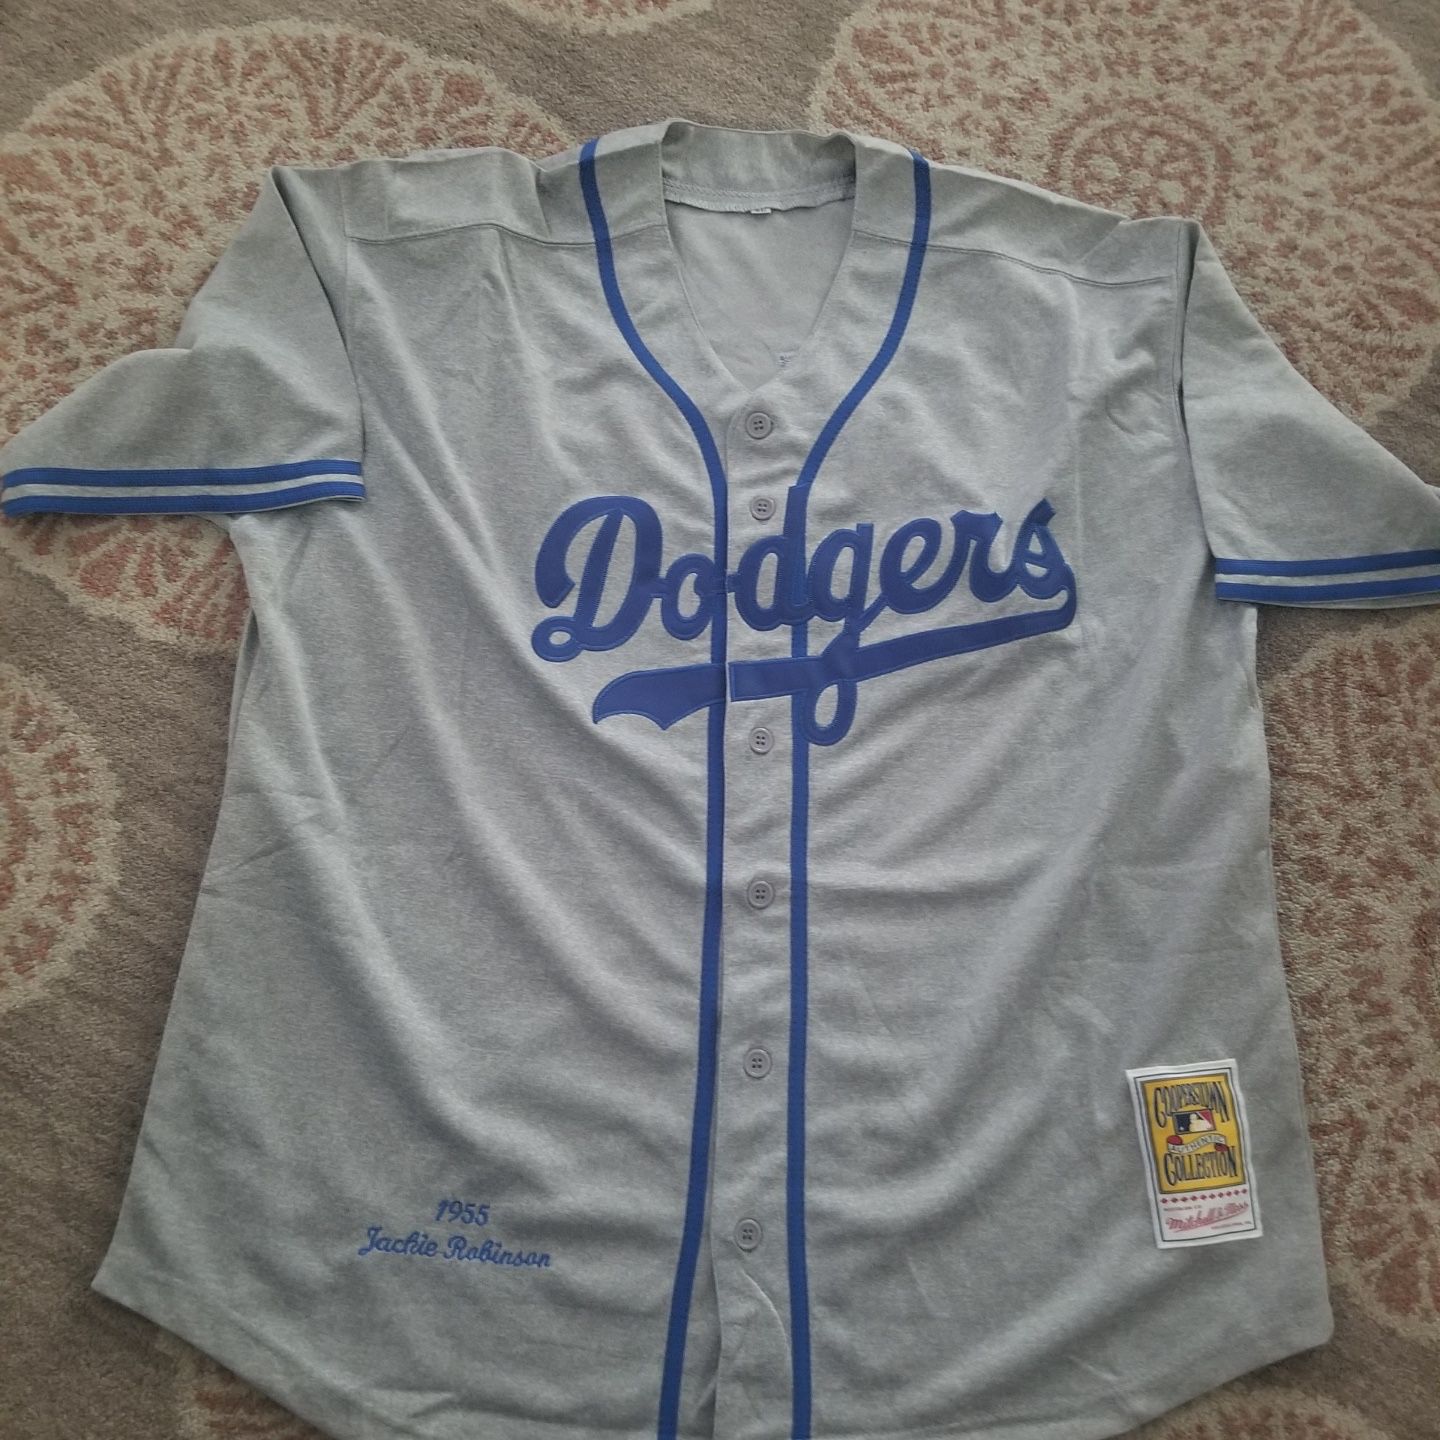 Women's Jackie Robinson Jersey for Sale in Redlands, CA - OfferUp